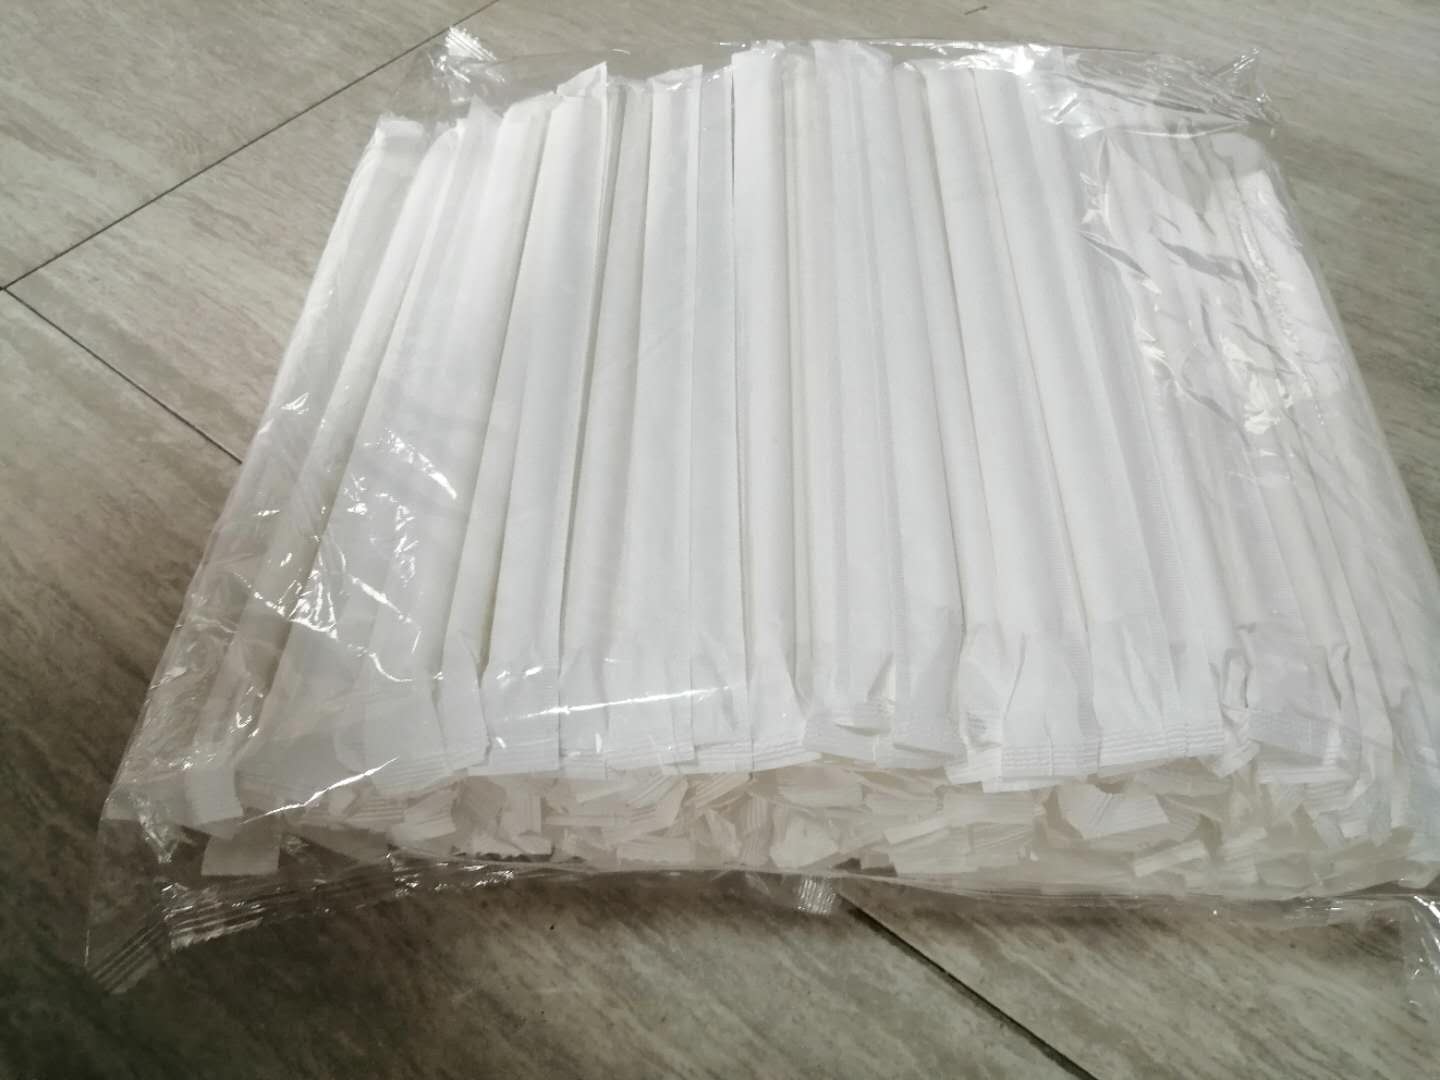 paper straw individual packing to group packing solution